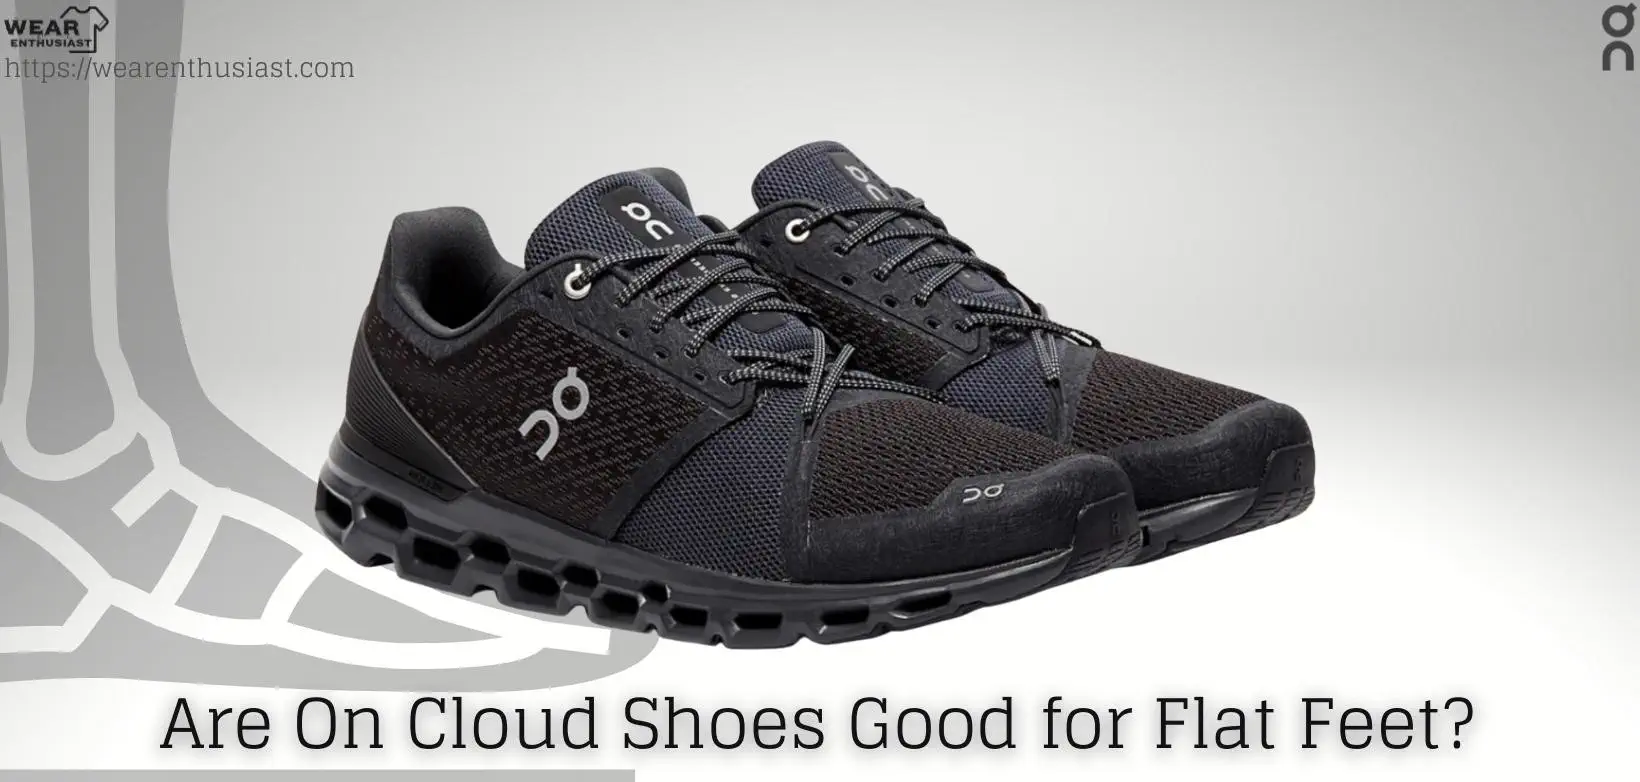 Are On Cloud Shoes Good for Flat Feet?